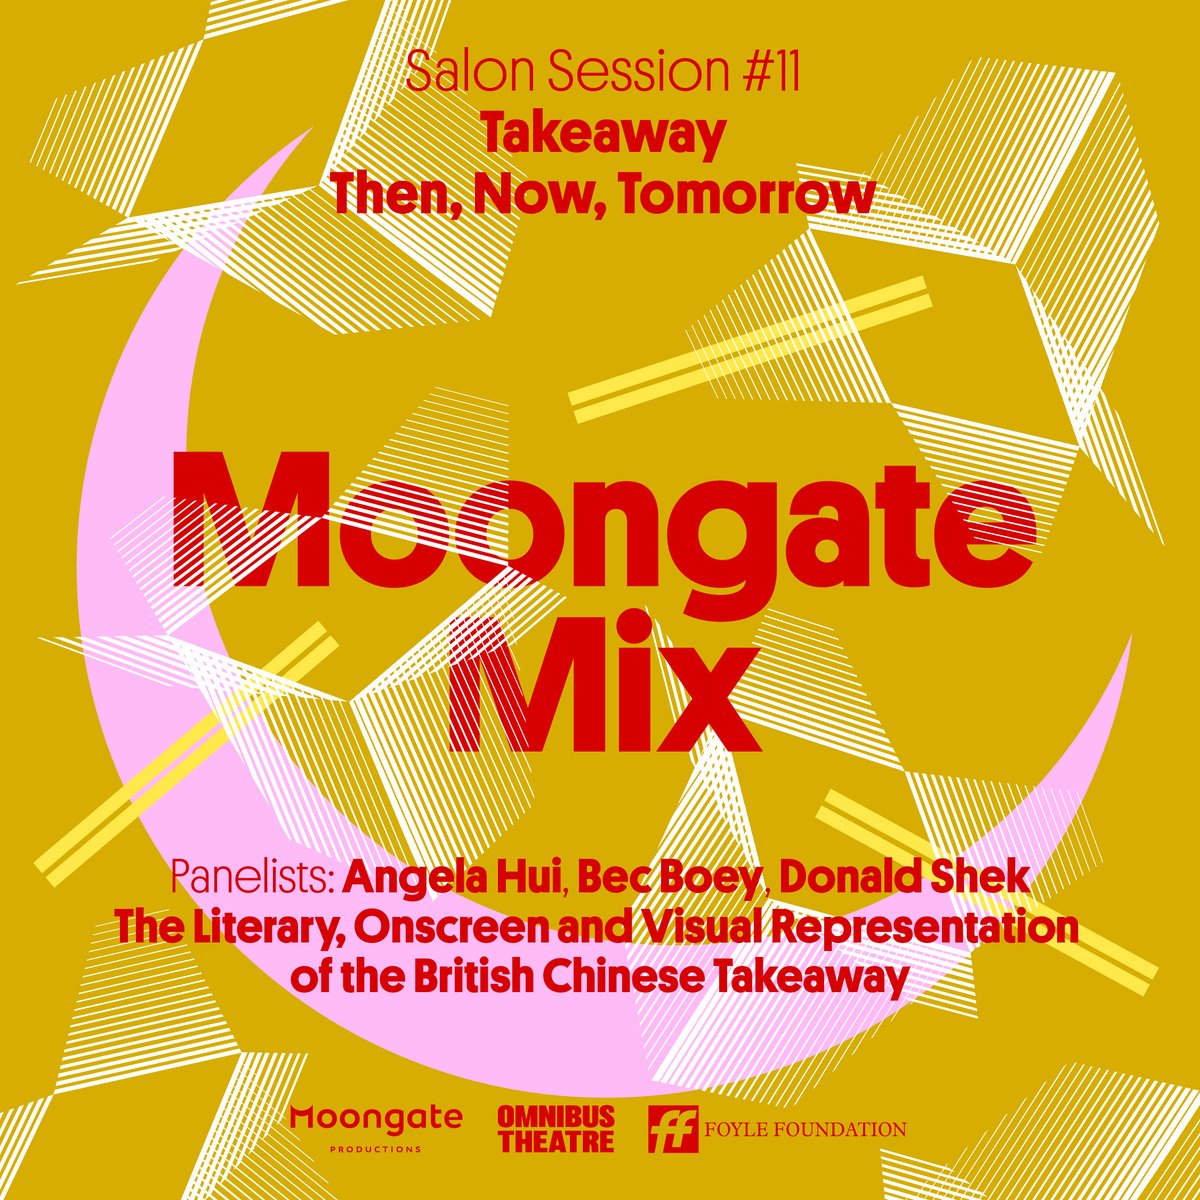 KLAXON: MOONGATE MIX IS BACK!!! We are very grateful to @OmnibusTheatre & #FoyleFoundation for their support in bringing #MOONGATEMIX back in 2024! 13th May 2024 Takeaway: Then, Now, Tomorrow - The Literary, Onscreen and Visual Representation of the British Chinese Takeaway